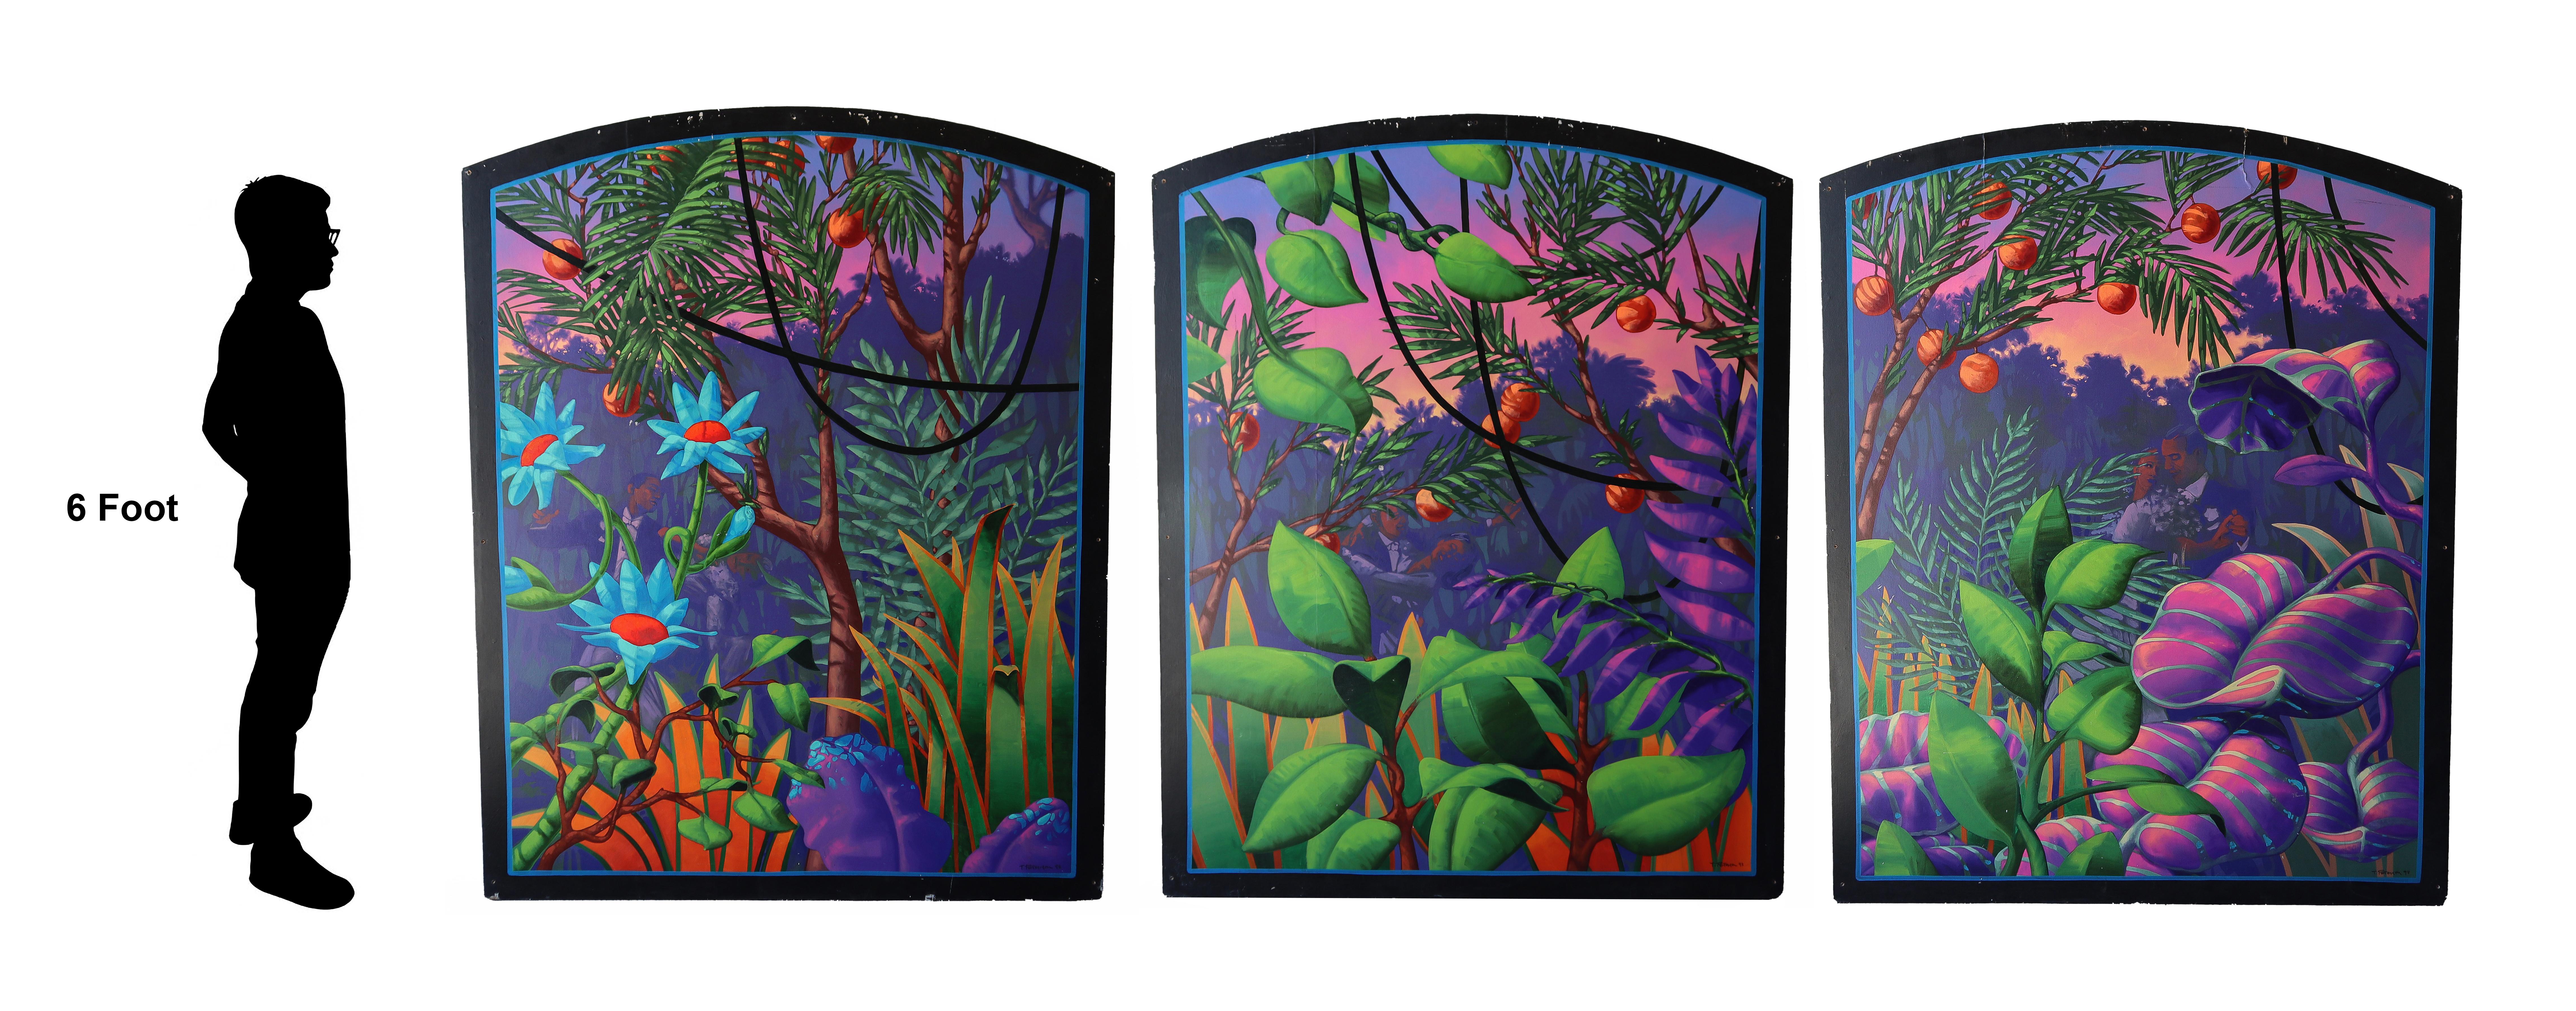 Gorgeous set of 3, colorful Tropical foliage paintings.

Painting need a little refreshing but can definitely be used as is if you don't mind small imperfections.  Small chips to black, one has a small break at the top.  All easy restorations.  